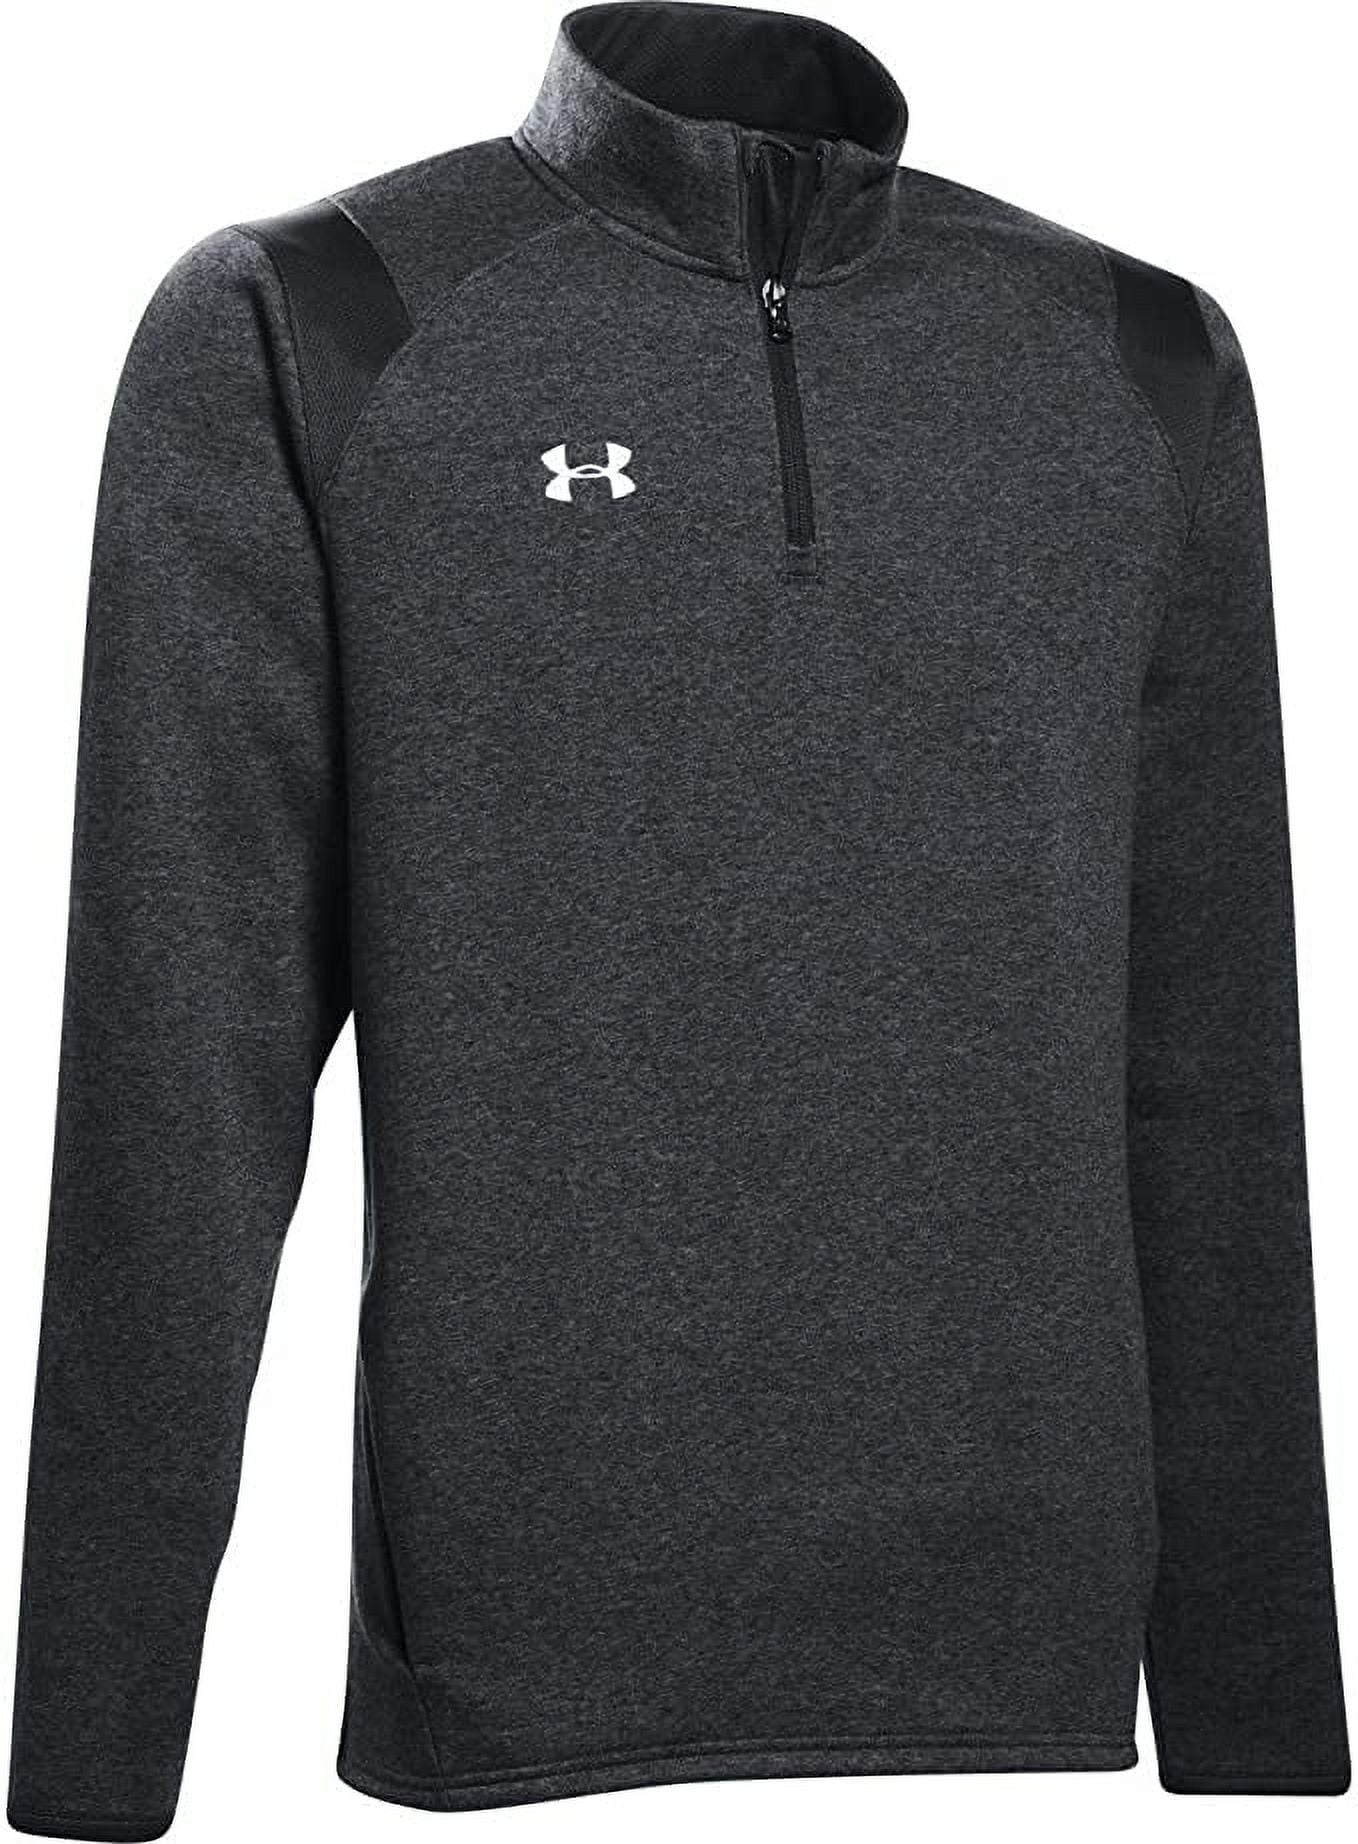 For a limited time only: all Hustle Fleece $19.99 at UA Factory House!  @underarmour While supplies last. Exclusions may apply. US Factory…